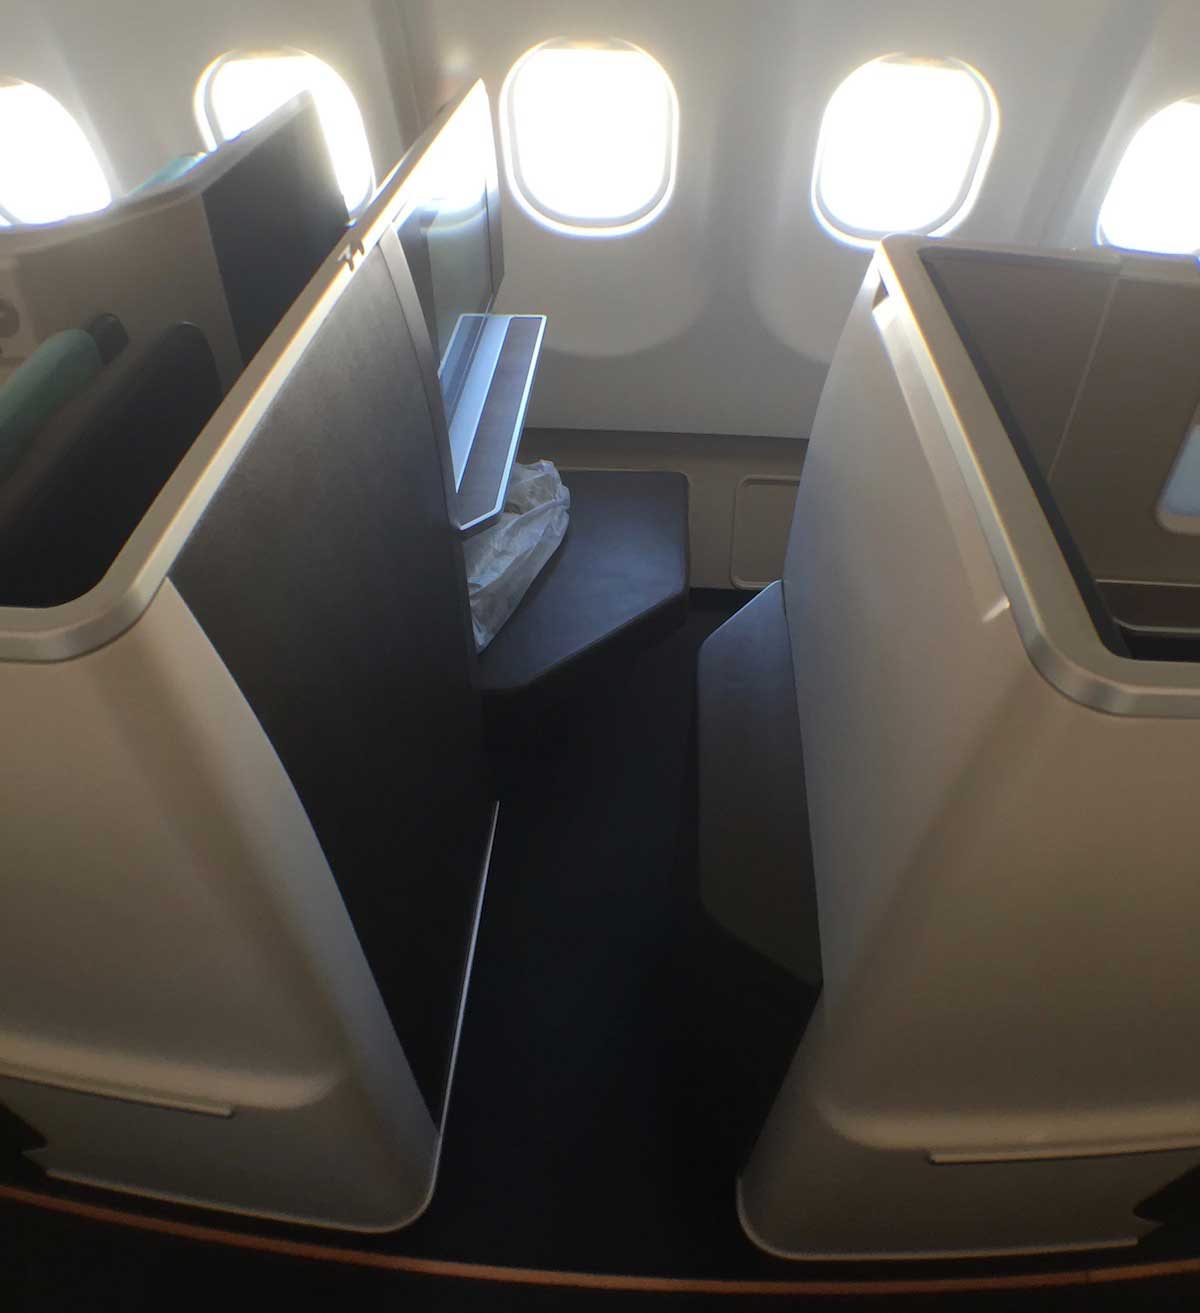 The World’s 9 Best Business Class Seats - AN Aviation Services Co.